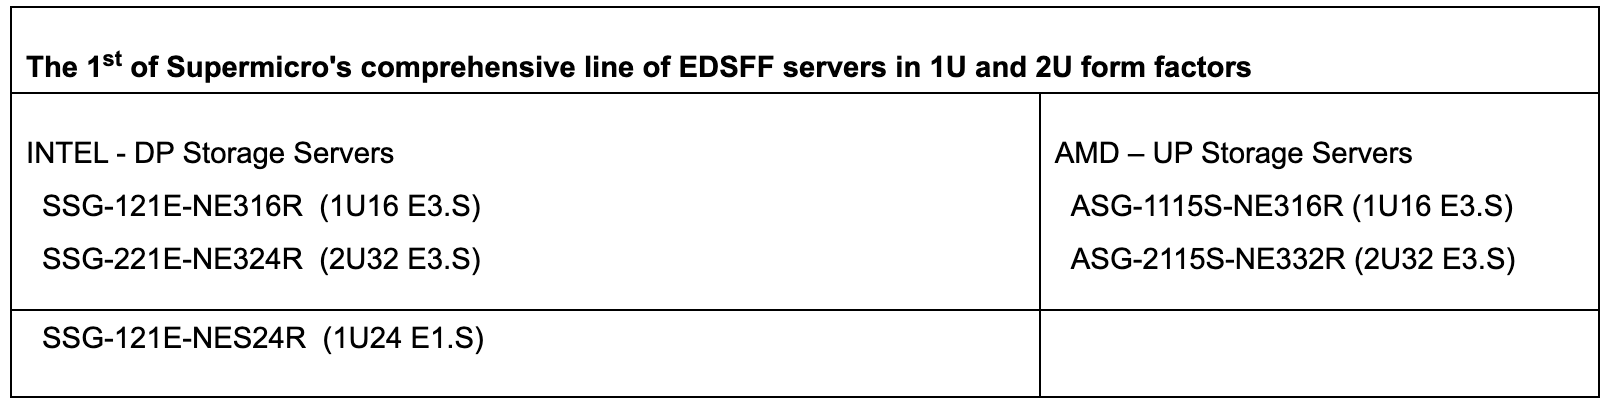 EDSFF - A New Form Factor for Next Gen Servers and Storage